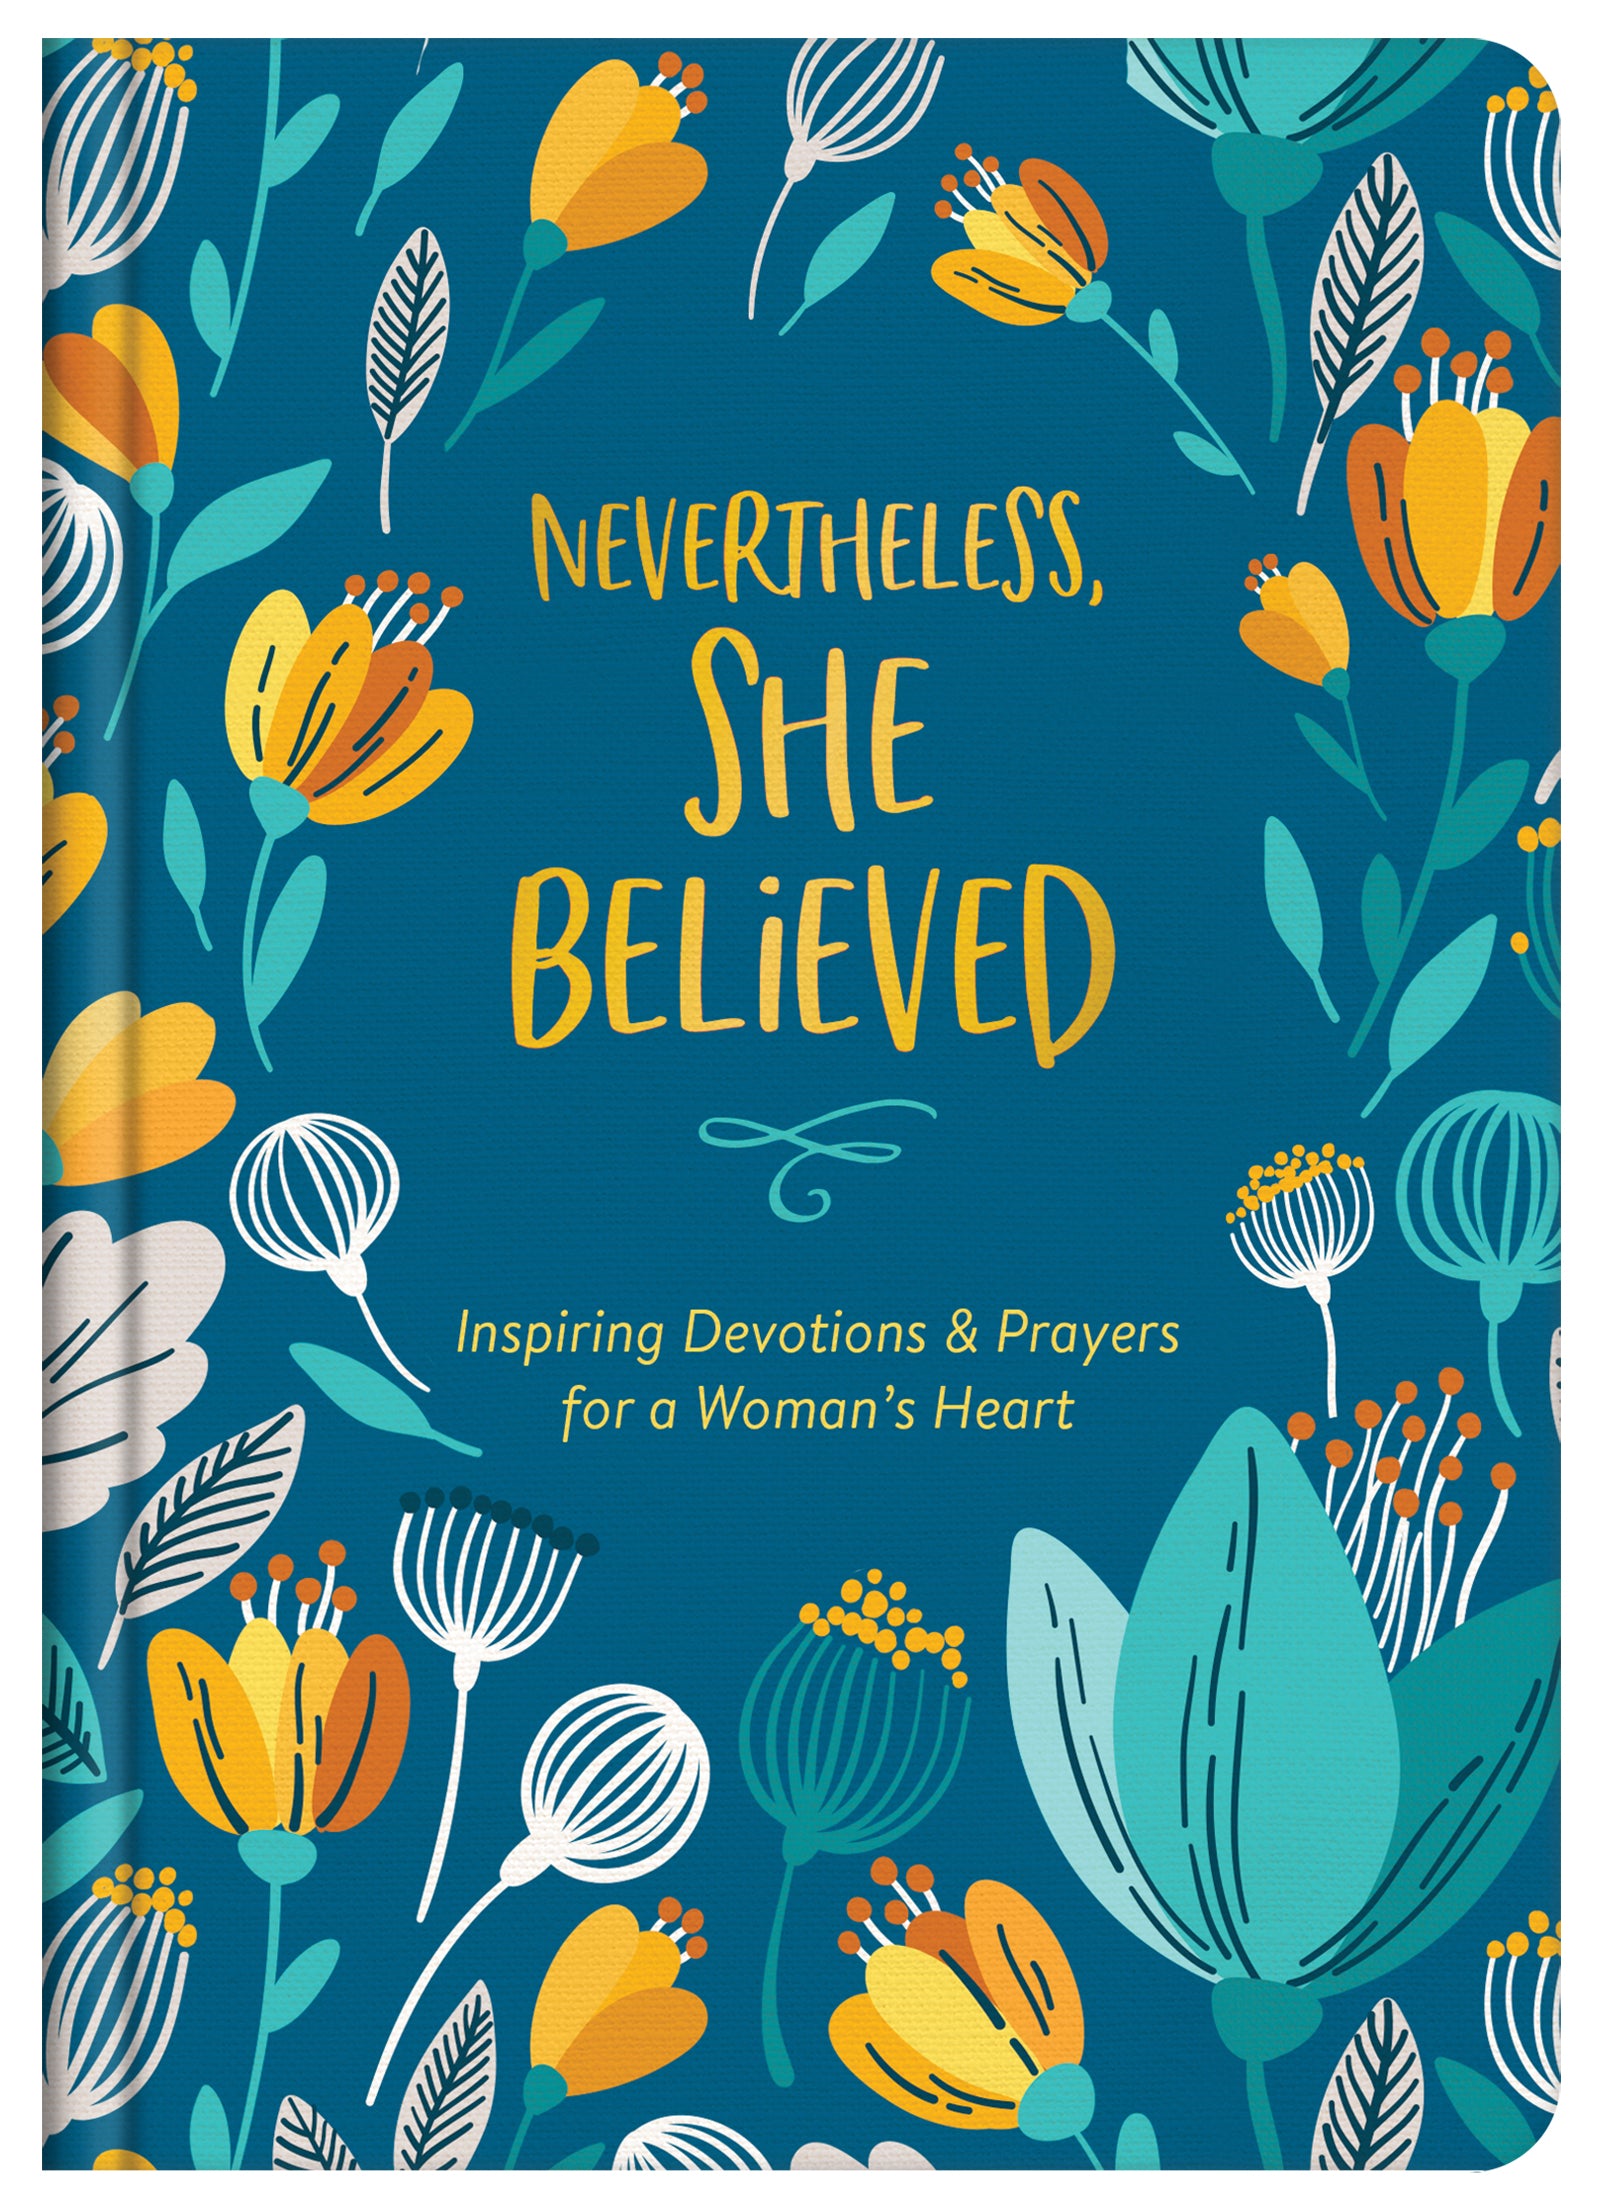 Nevertheless, She Believed - The Christian Gift Company